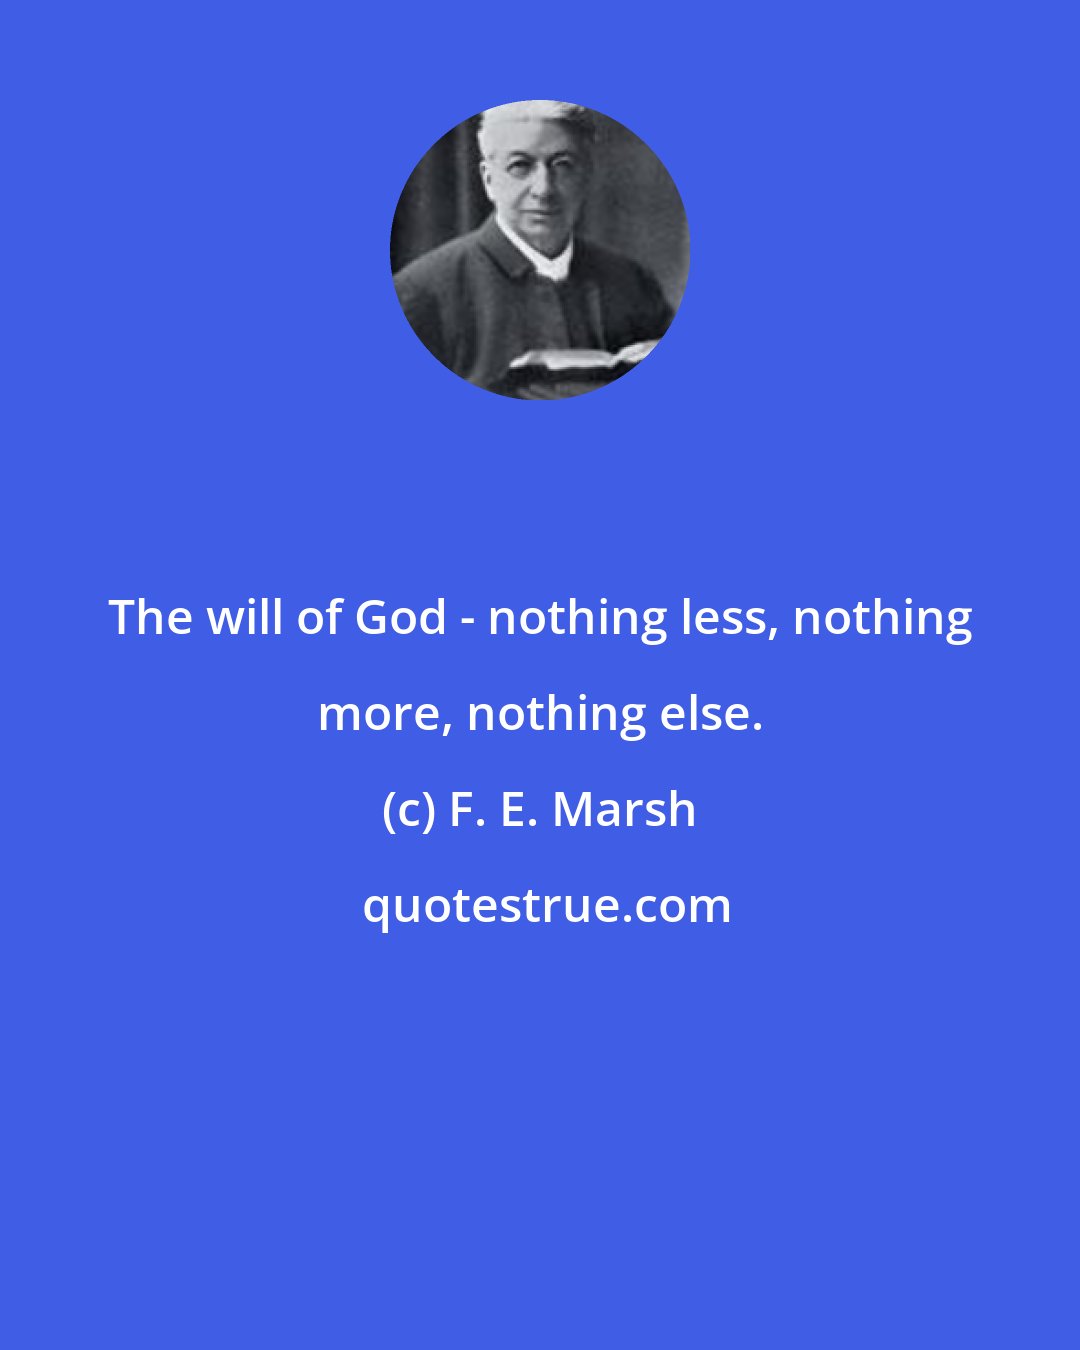 F. E. Marsh: The will of God - nothing less, nothing more, nothing else.